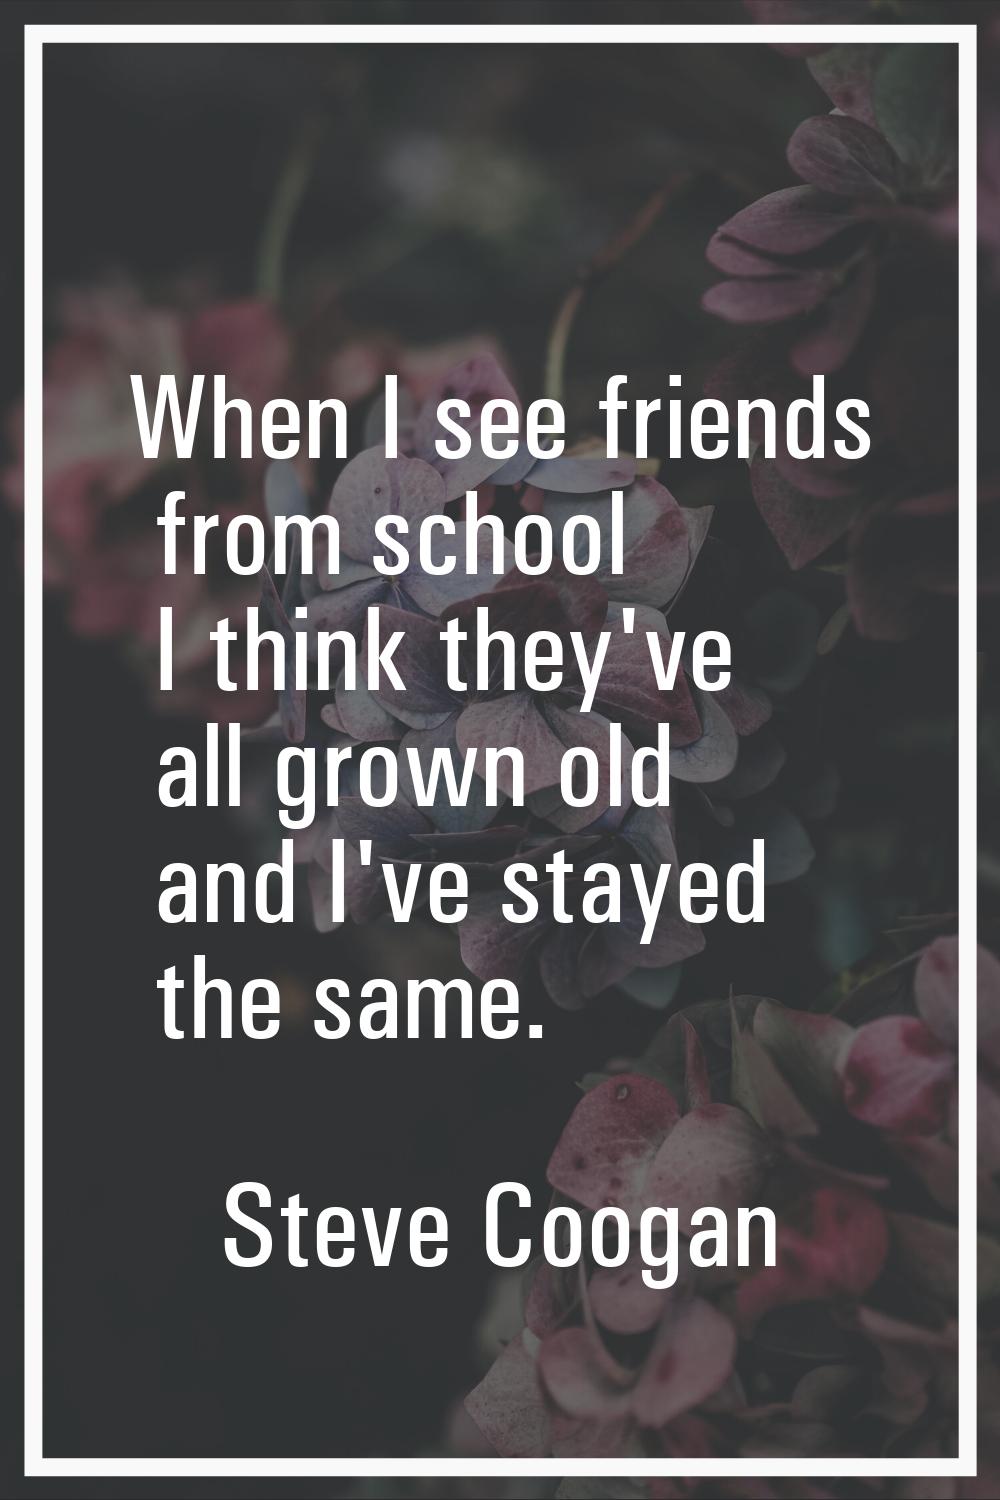 When I see friends from school I think they've all grown old and I've stayed the same.